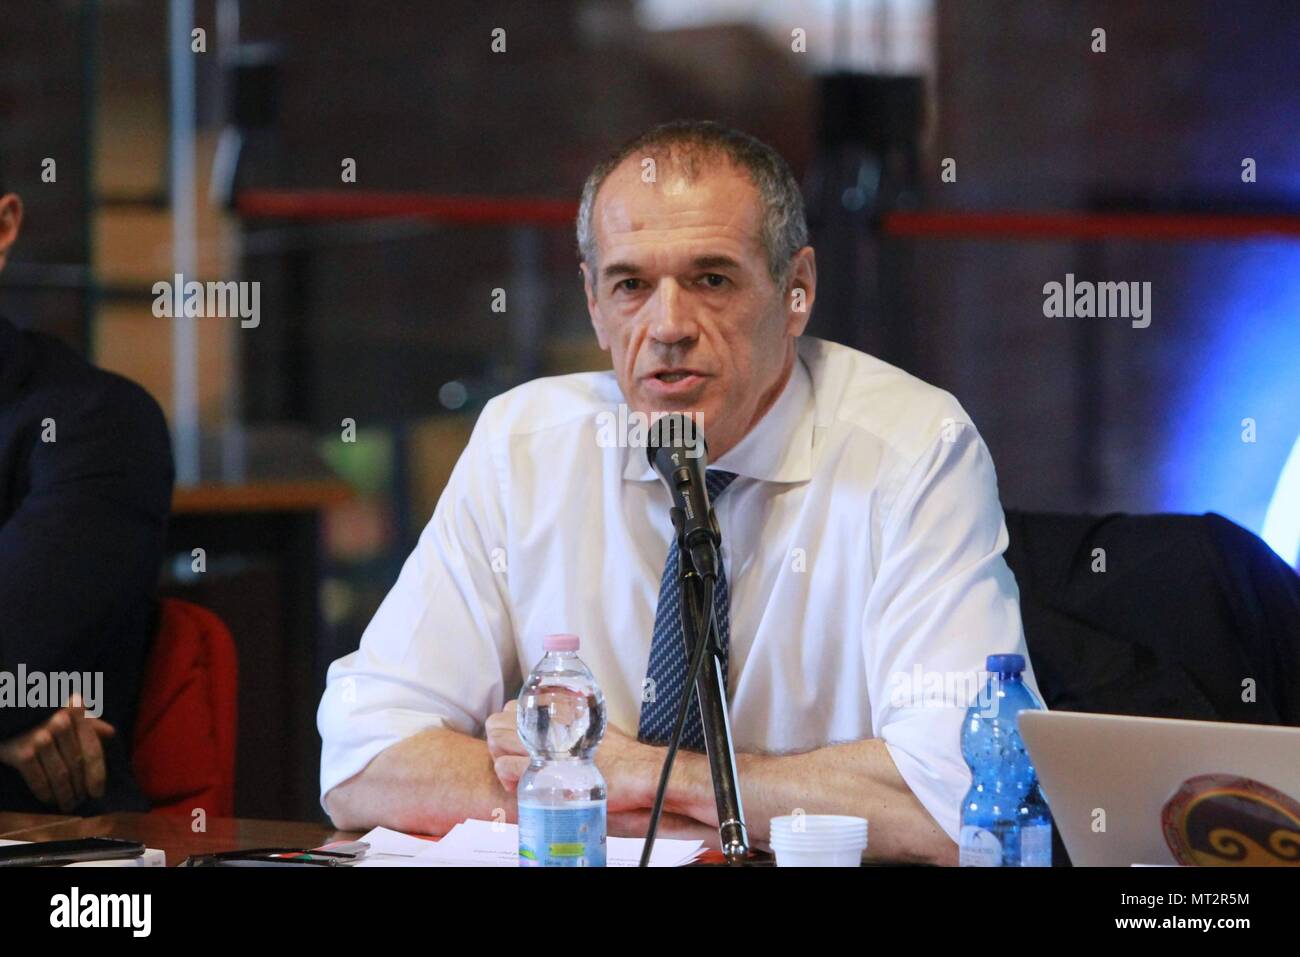 DEBATE ON PUBLIC DEBT IN STATALE WITH CARLO COTTARELLI (Alberto Cattaneo, MILAN - 2018-05-02) ps the photo can be used respecting the context in which it was taken, and without the defamatory intent of the people represented (Alberto Cattaneo, PHOTO ARCHIVE - 2018-05-28) ps the photo can be used respecting the context in which it was taken, and without the defamatory intent of the decoration of the people represented Stock Photo